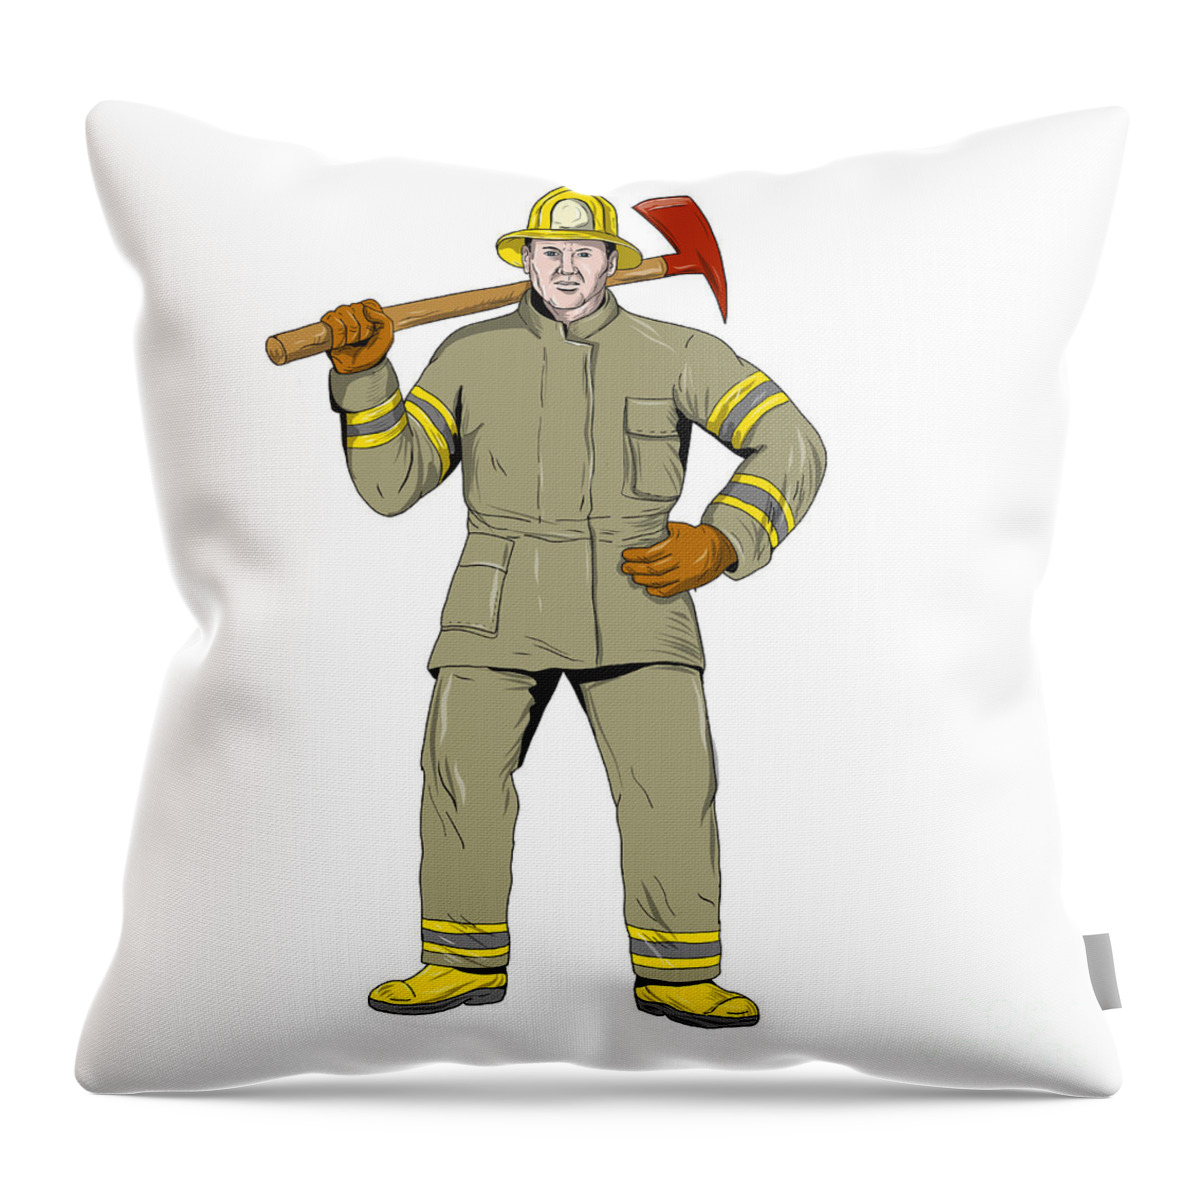 Drawing Throw Pillow featuring the digital art American Firefighter Fire Axe Drawing by Aloysius Patrimonio